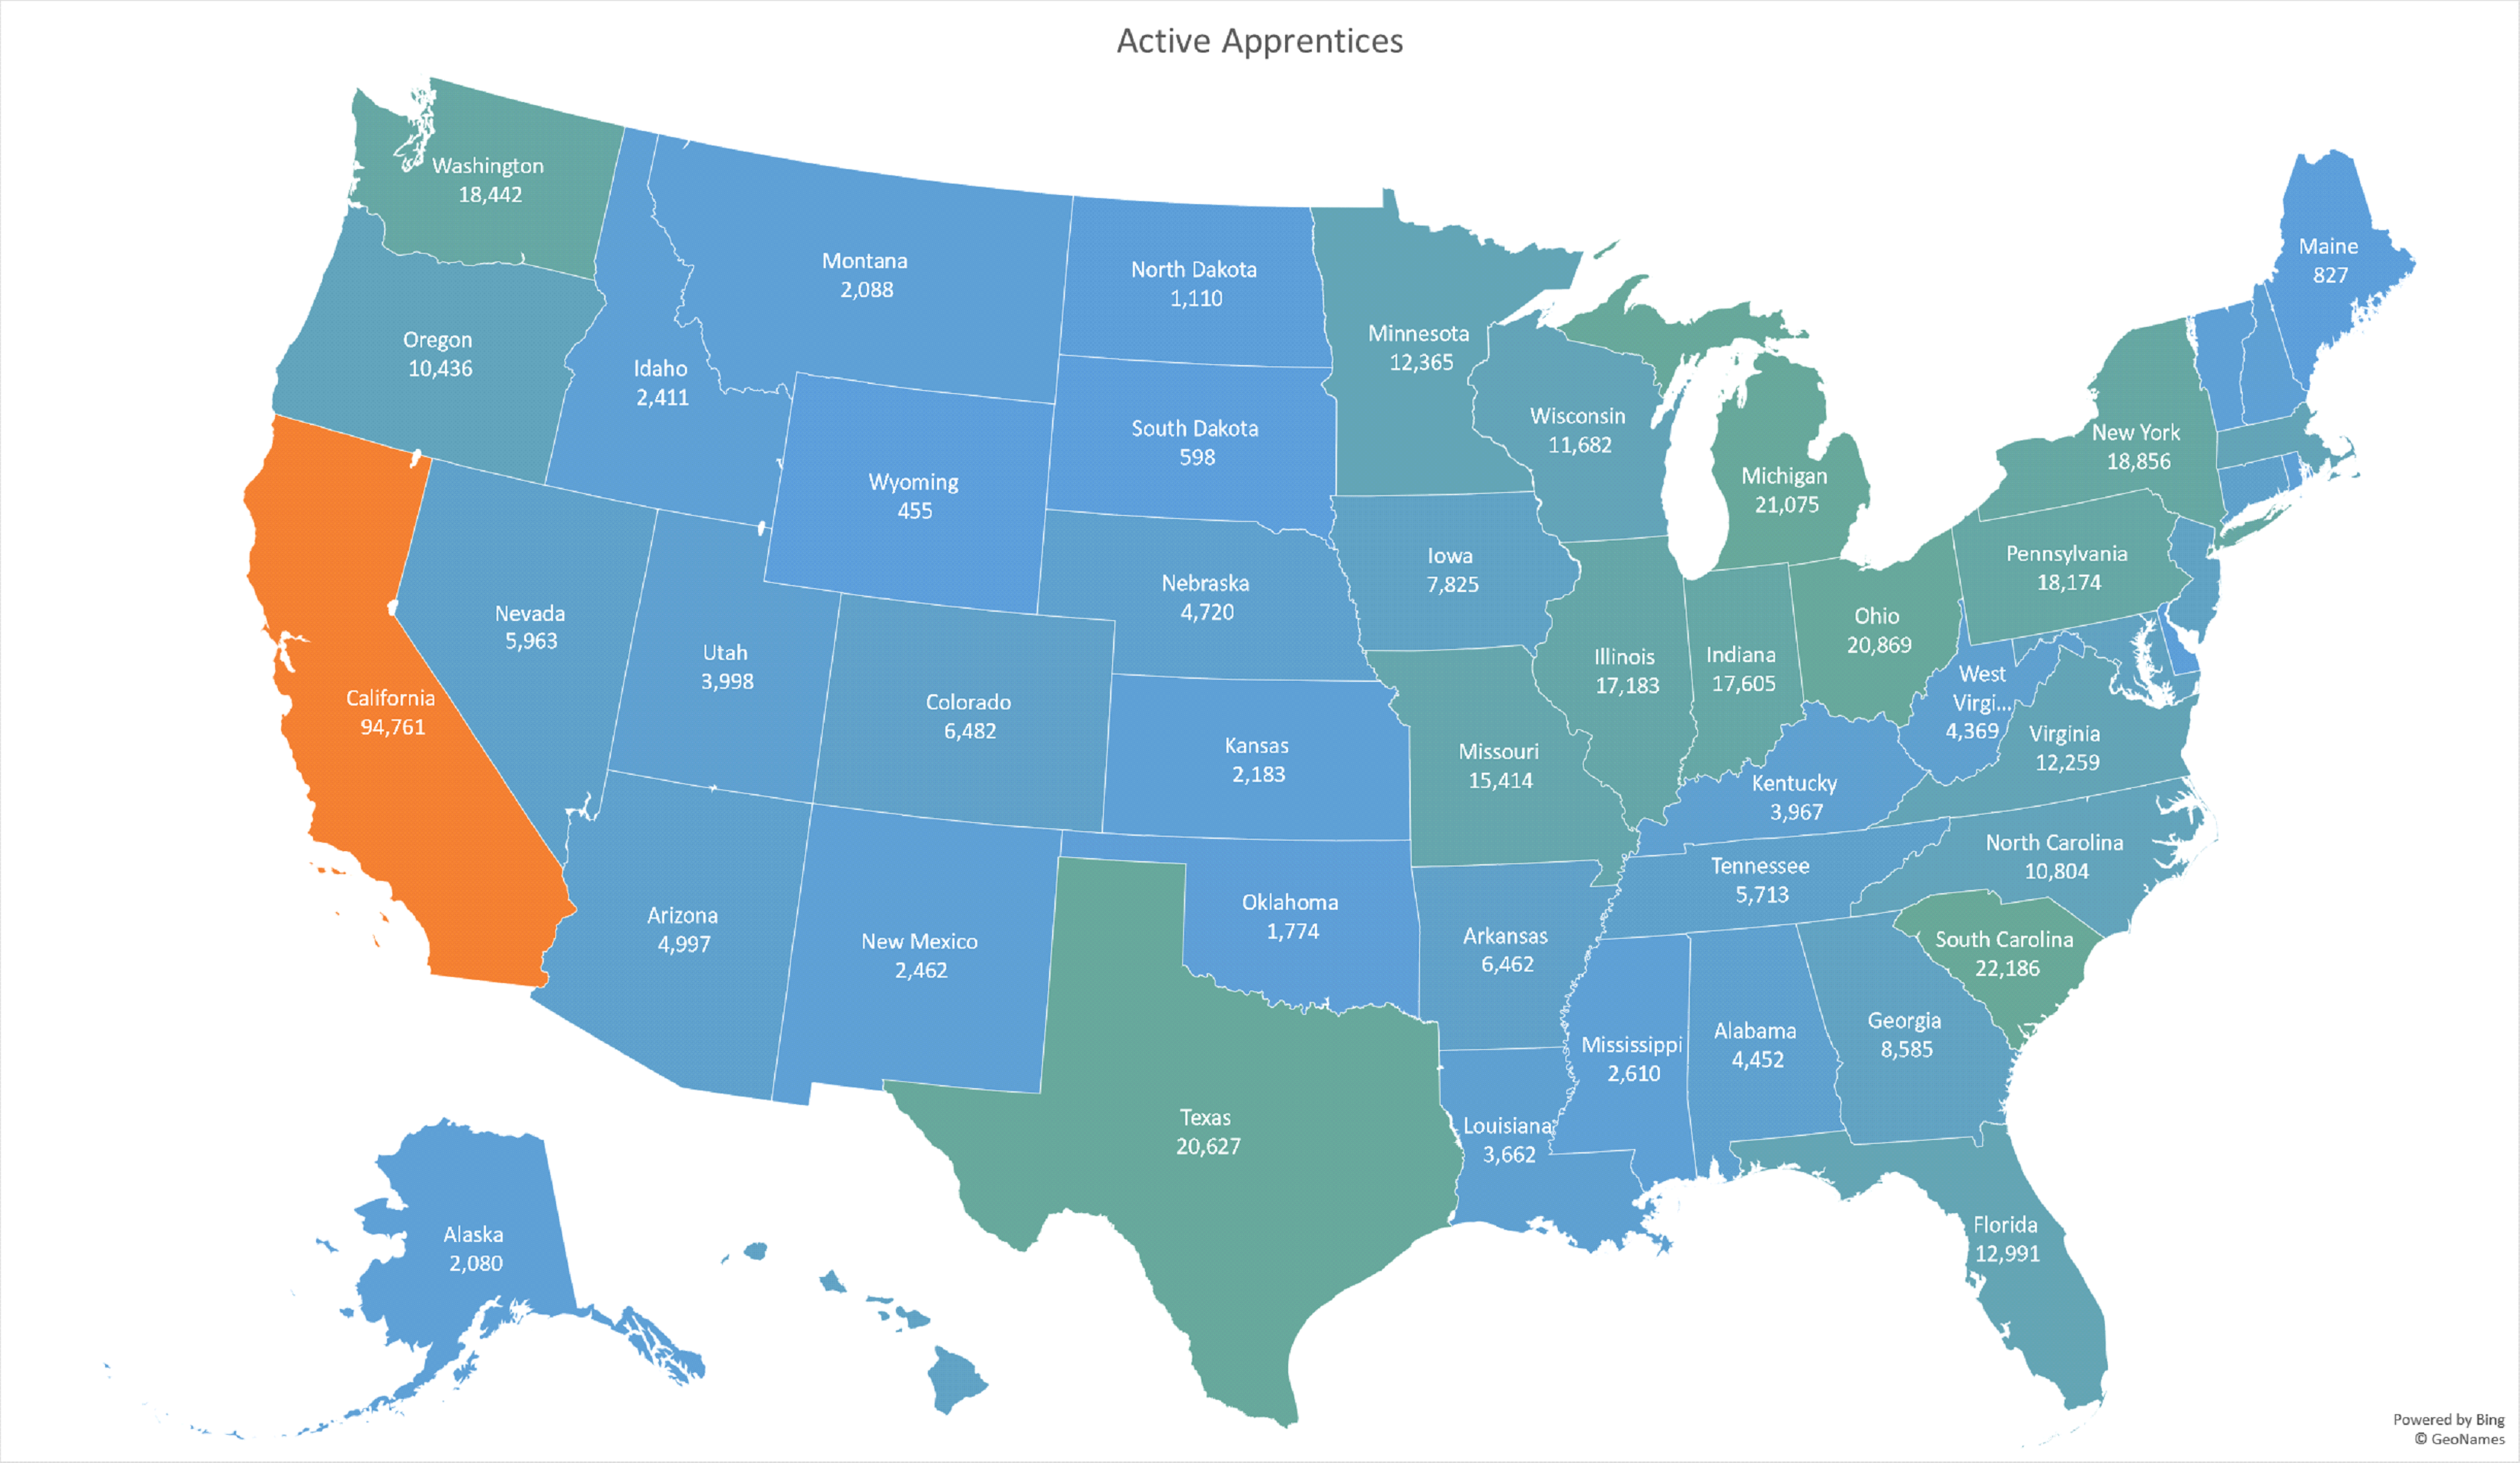 Image of Active Apprenticeship 2019 State Map